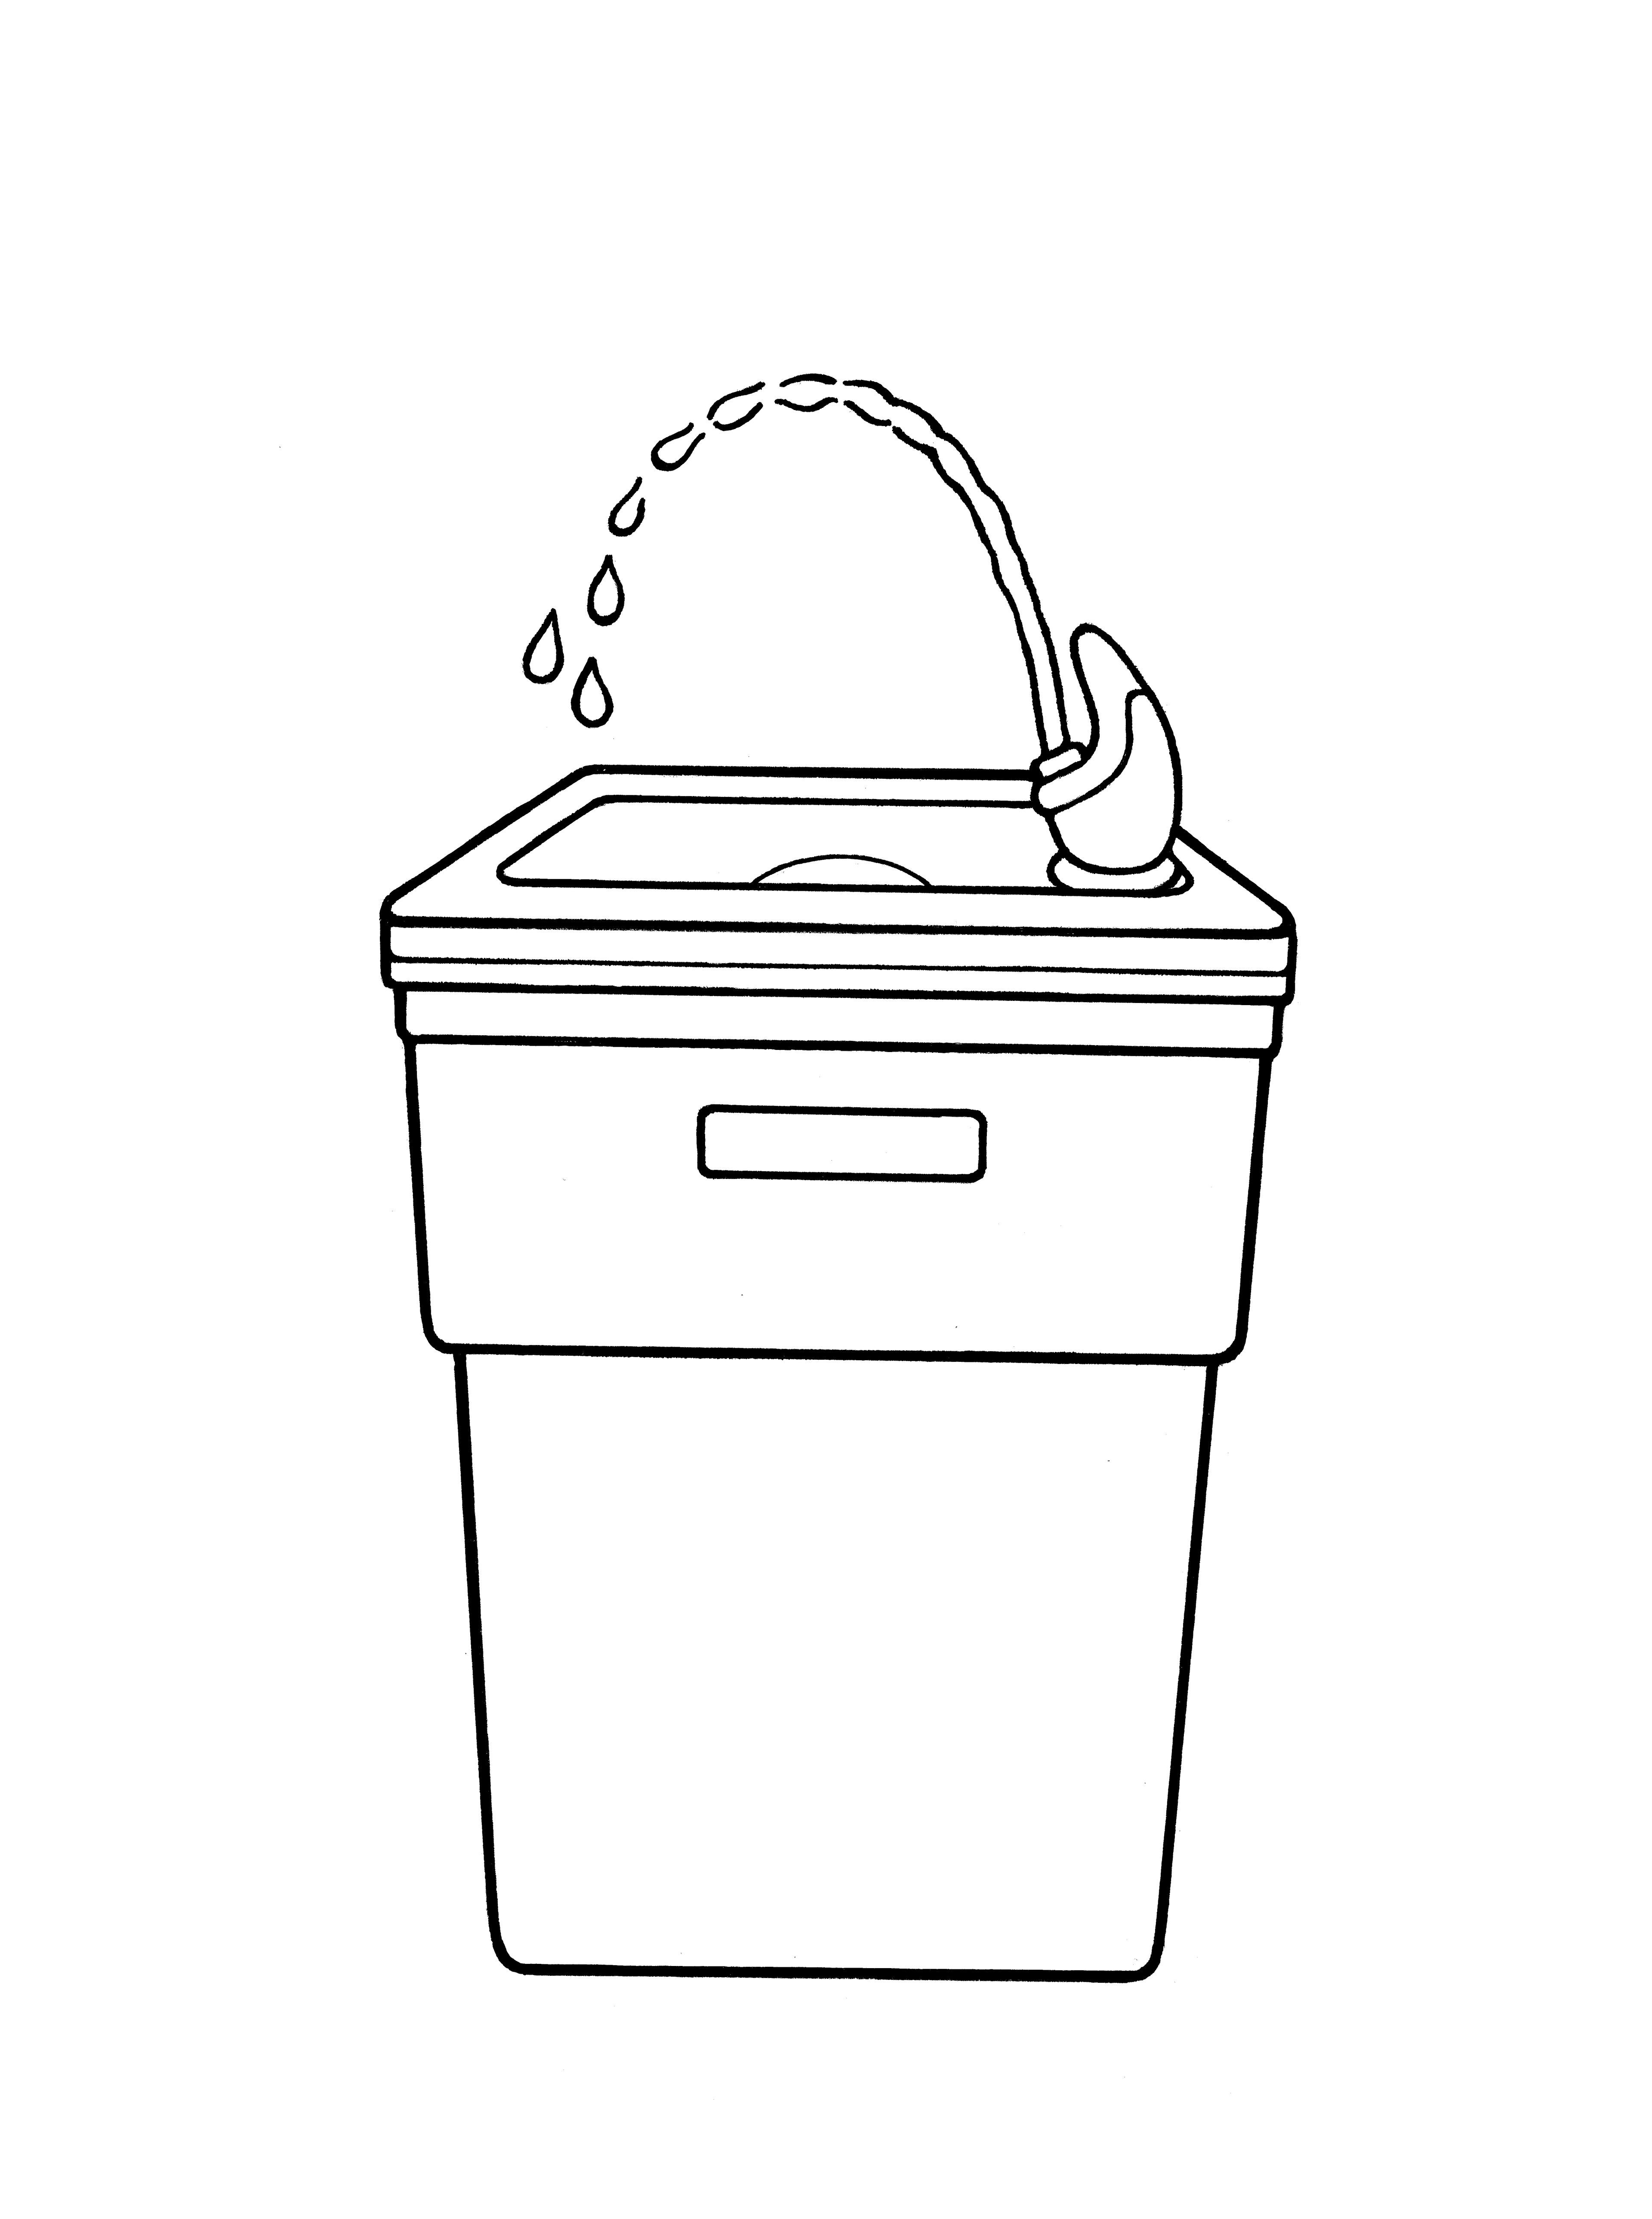 An illustration of a drinking fountain.